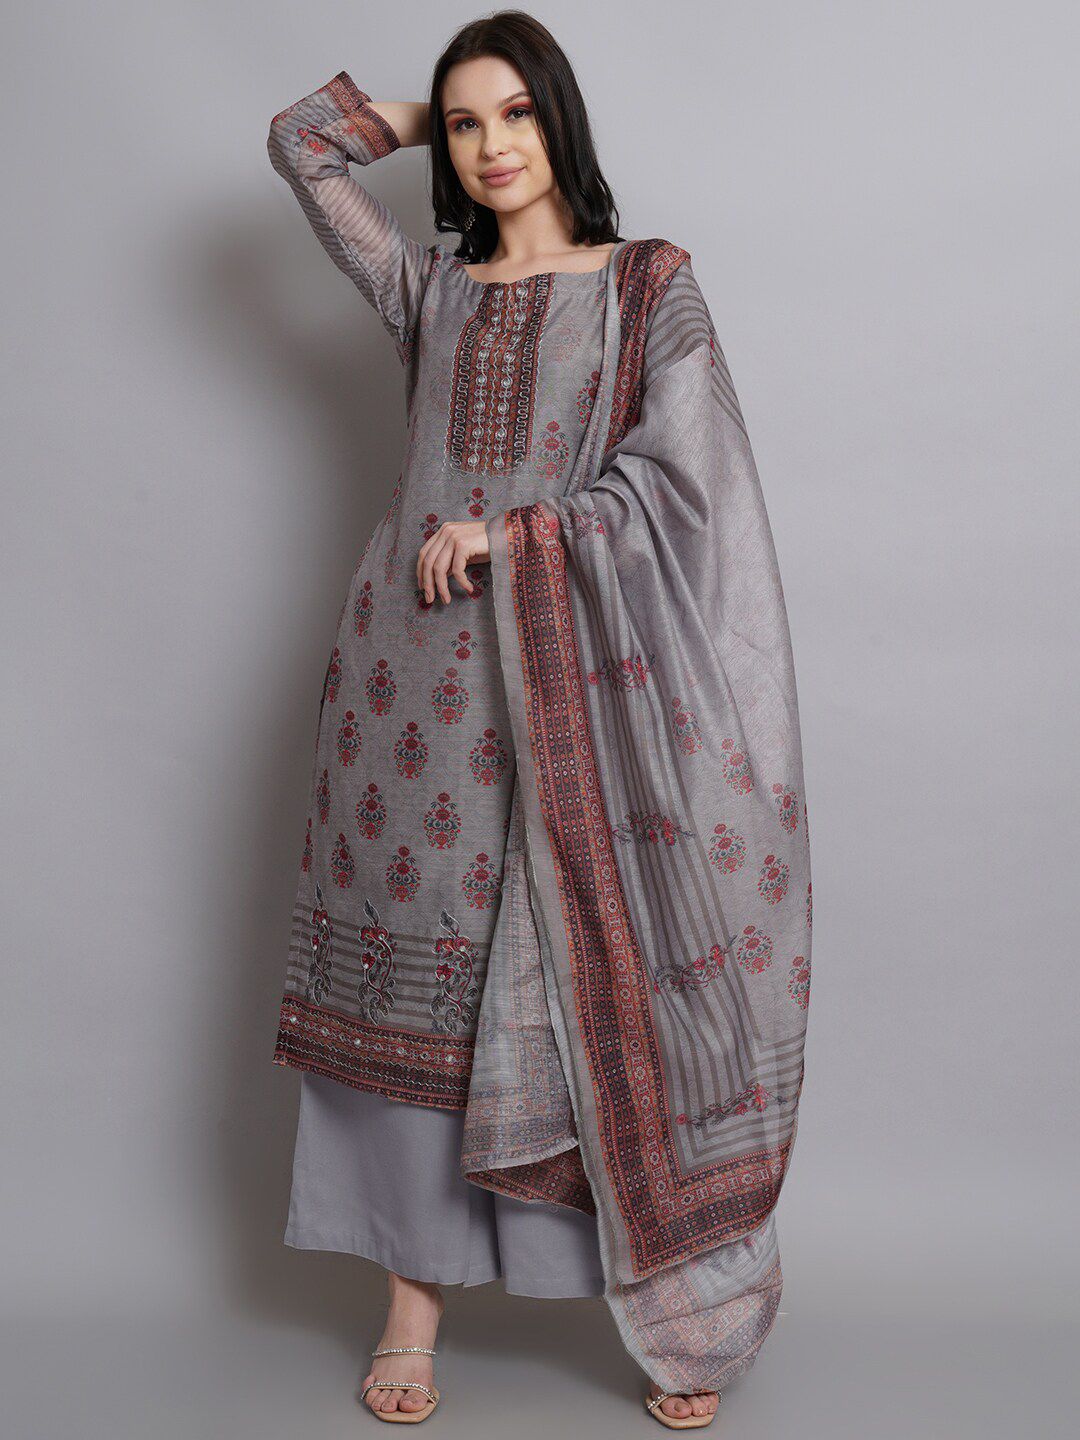 Stylee LIFESTYLE Women Grey & Maroon Printed Unstitched Dress Material Price in India